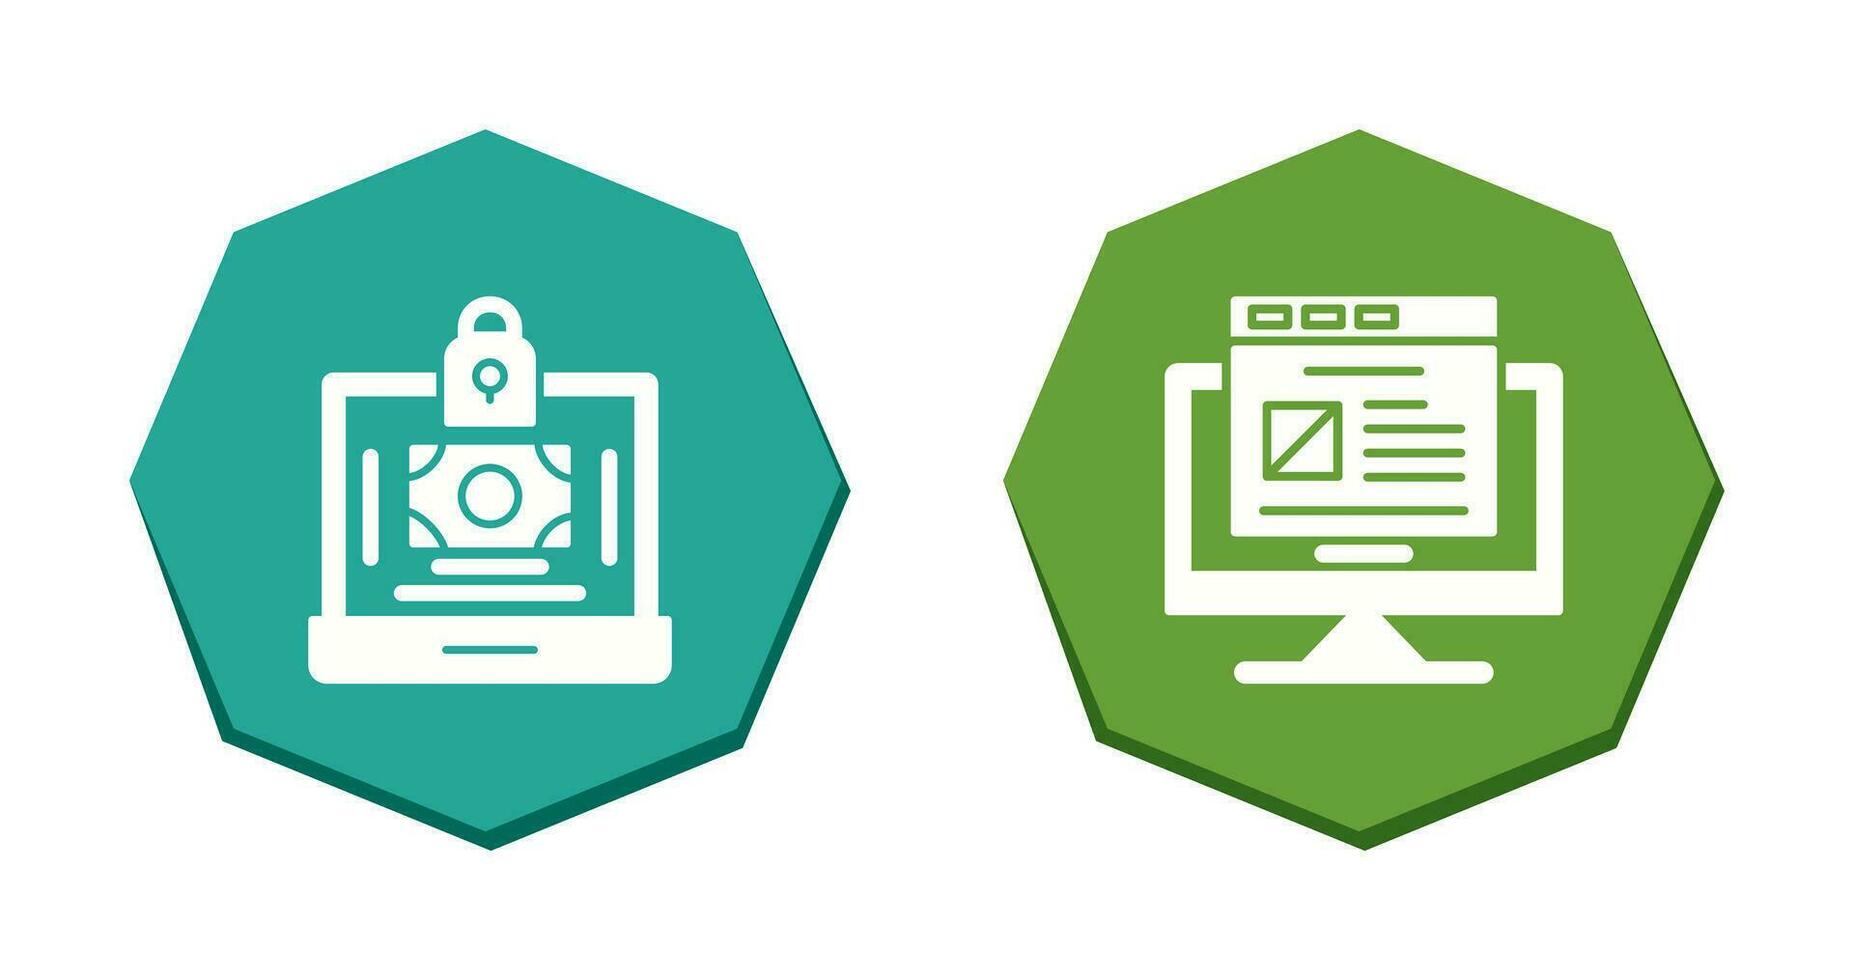 Secure Payment and Purchase Icon vector